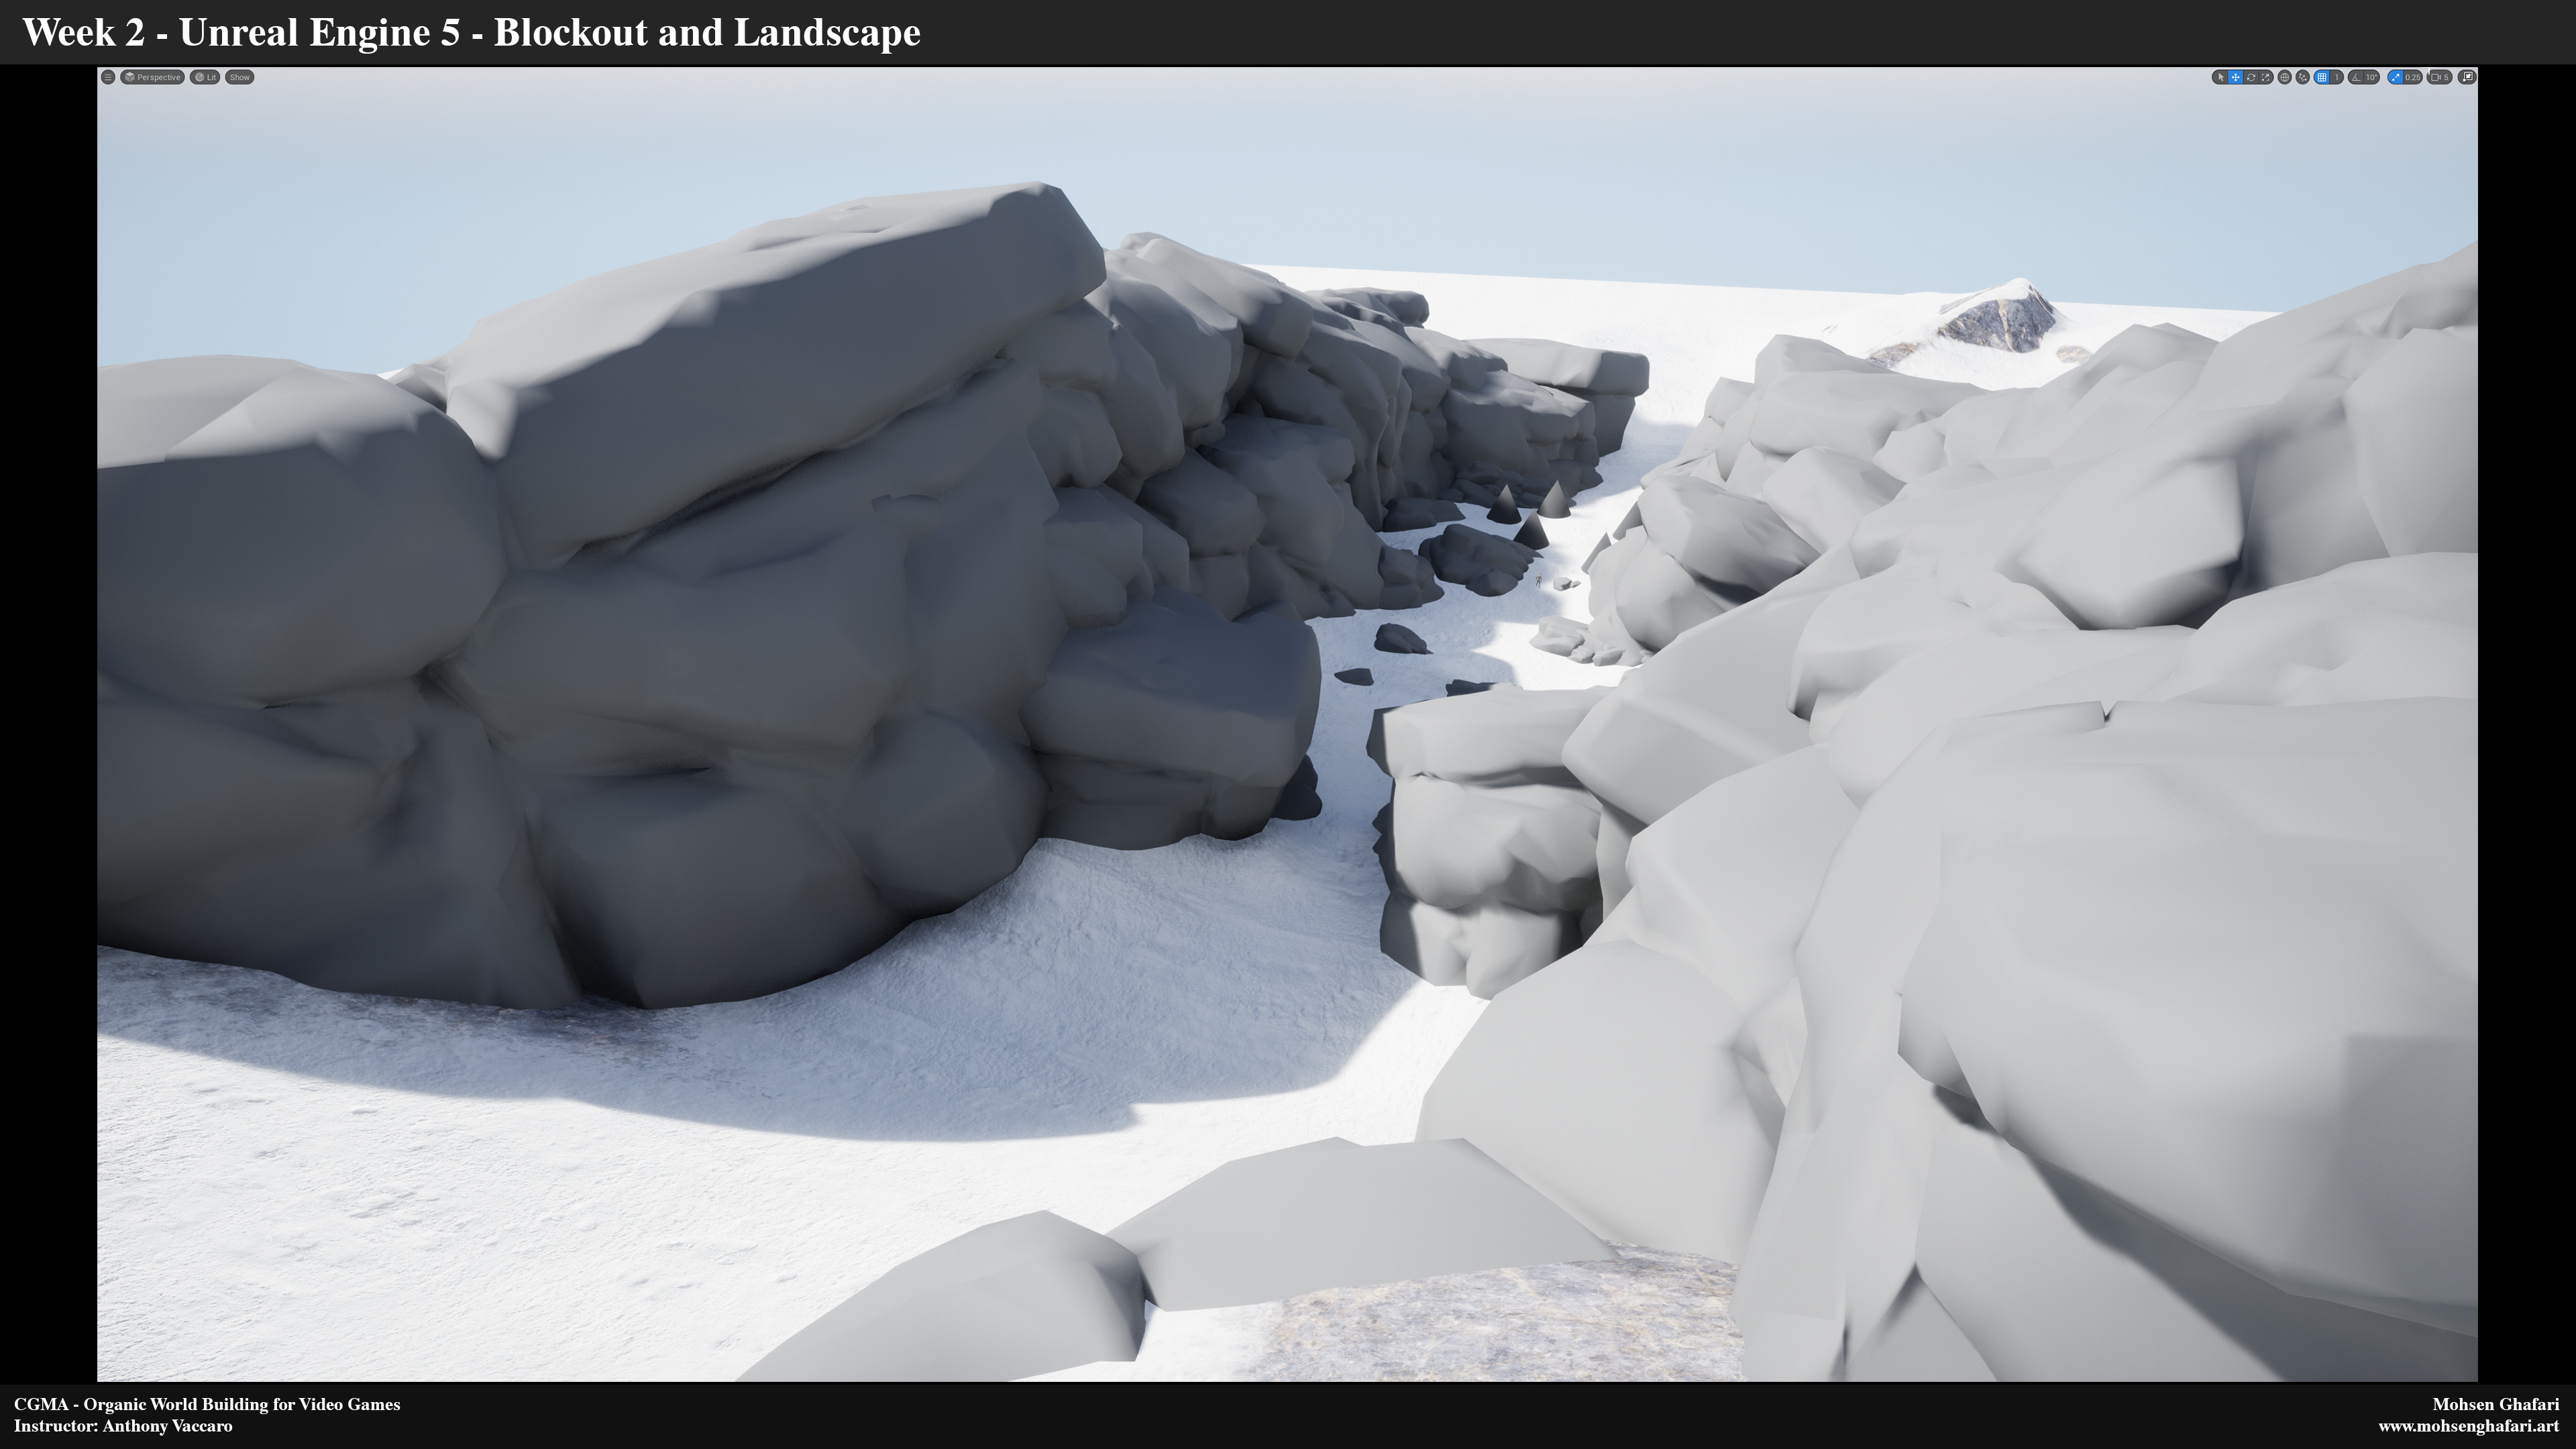 These two blockout are the early stages of my scene and I was struggling to find the right composition and shape, eventually it goes down to smaller portion of the scene which these rocks supported it.